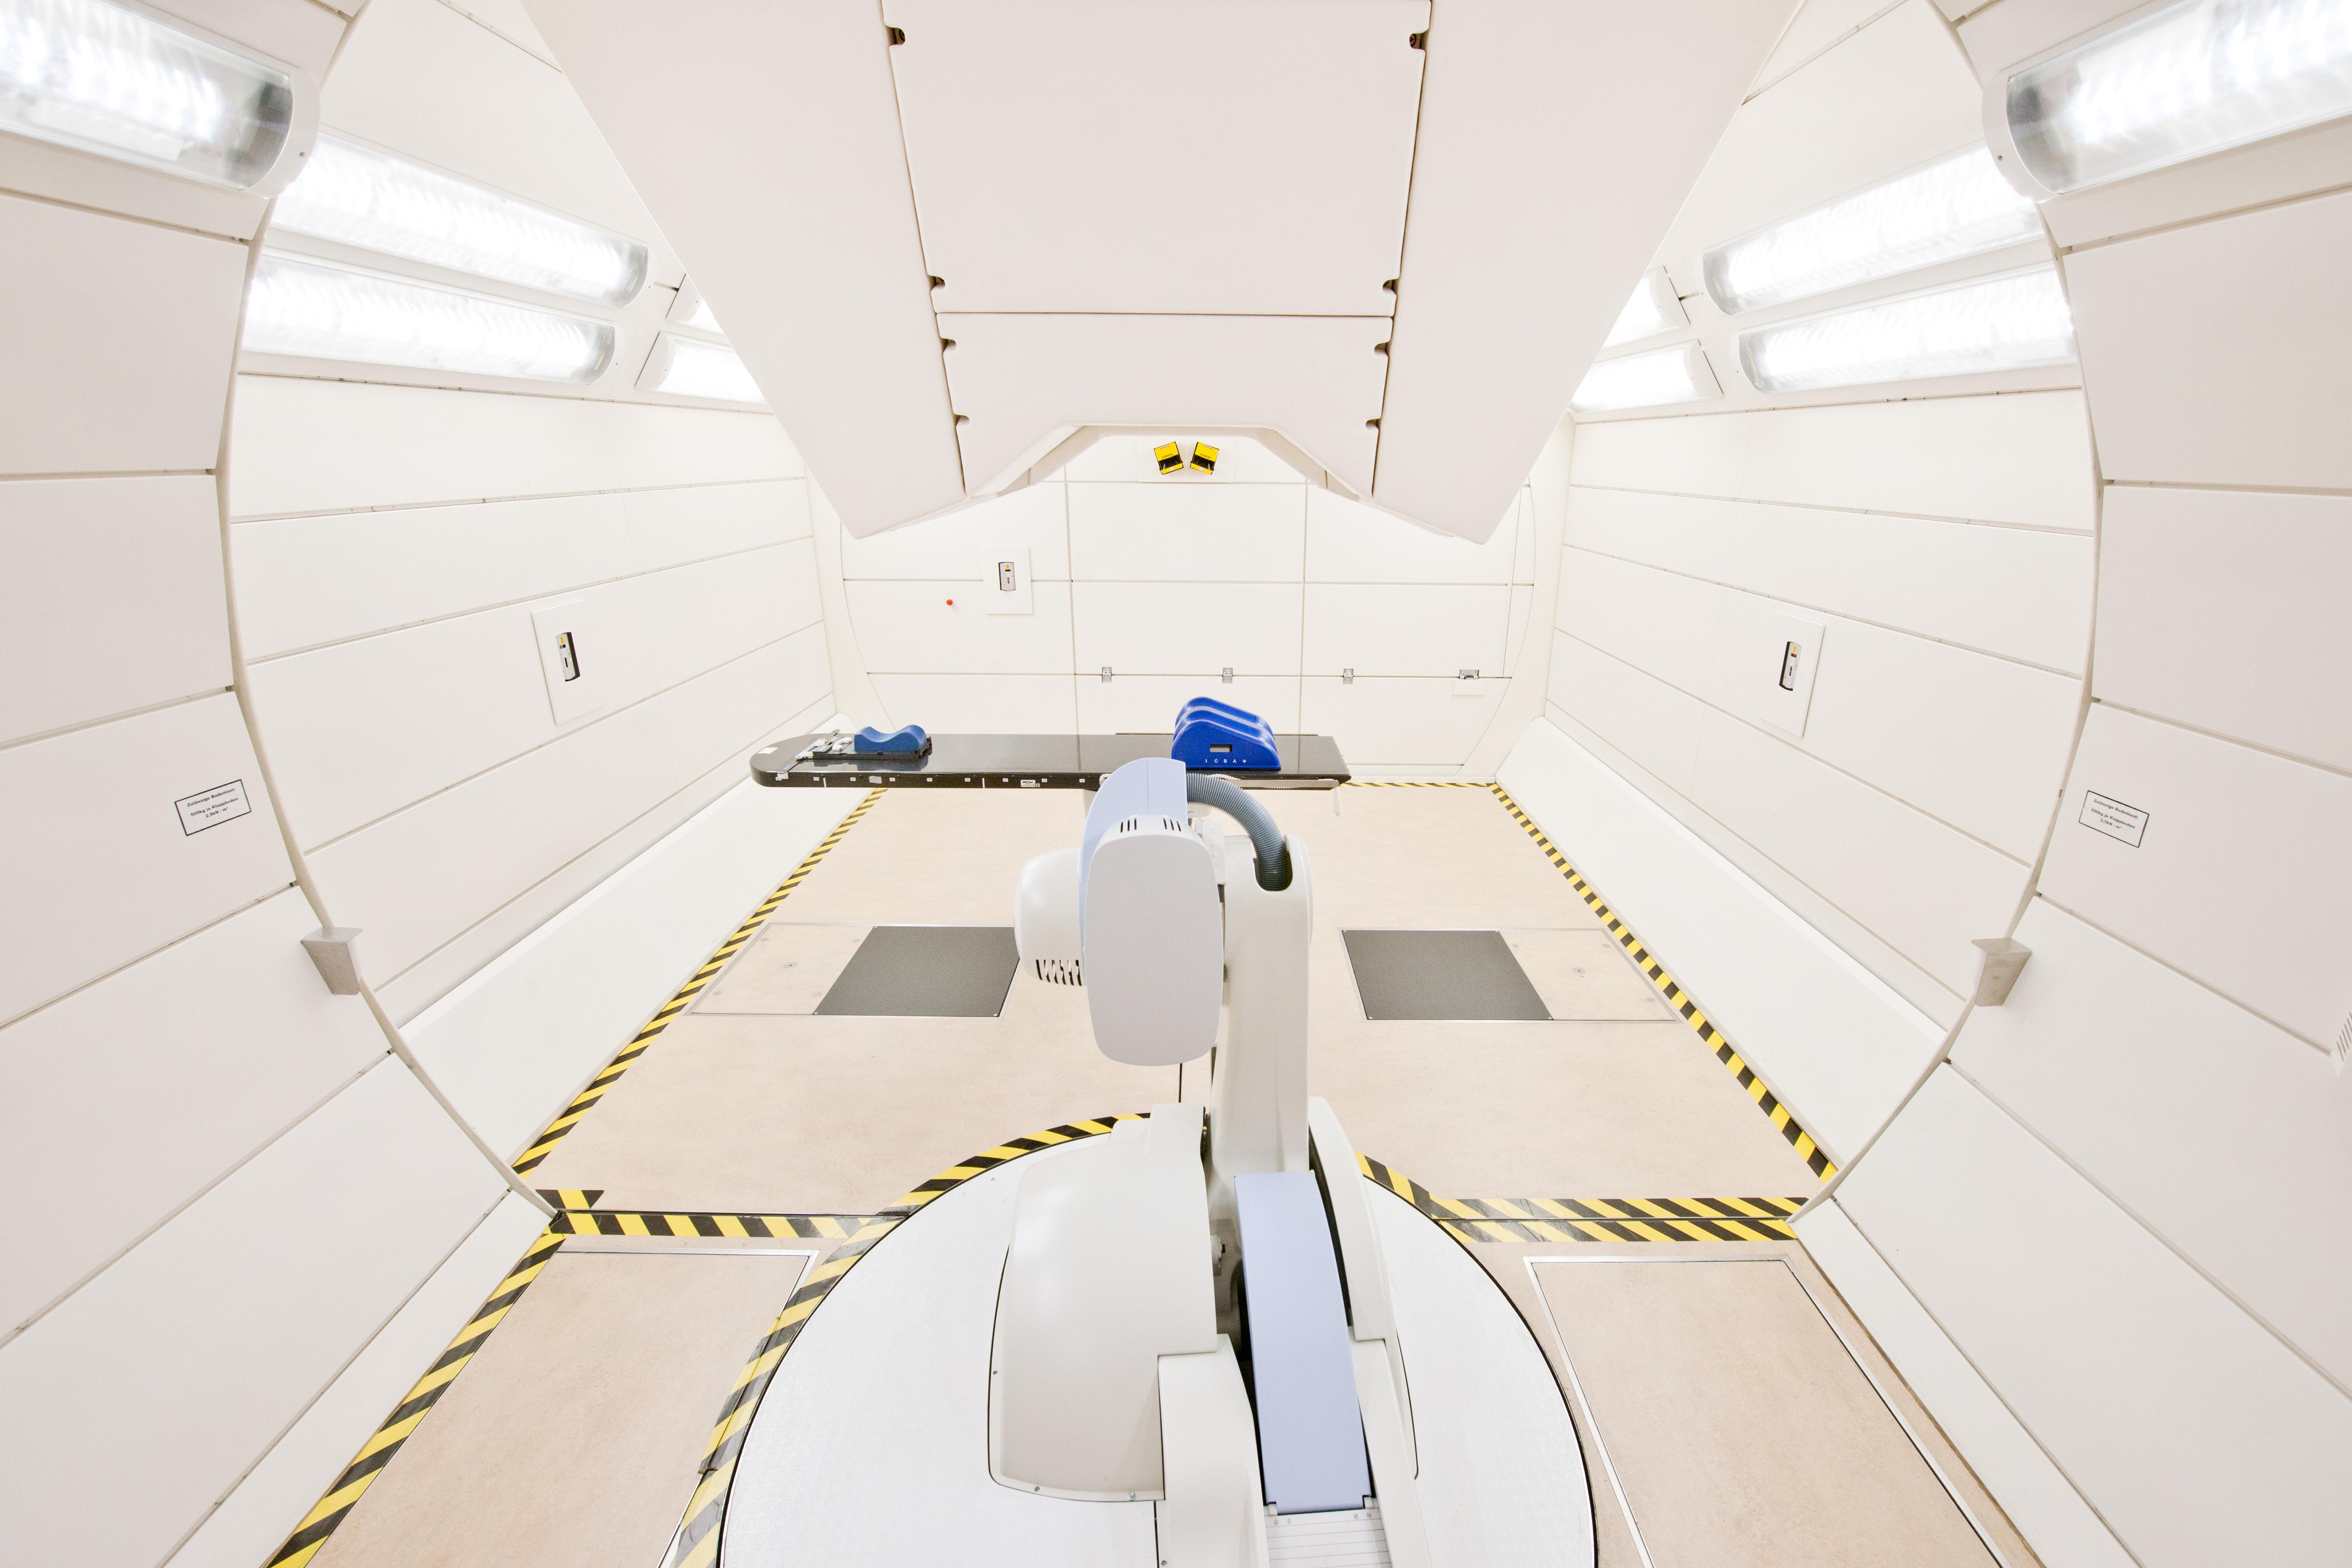 View into a radiotherapy room with a gantry